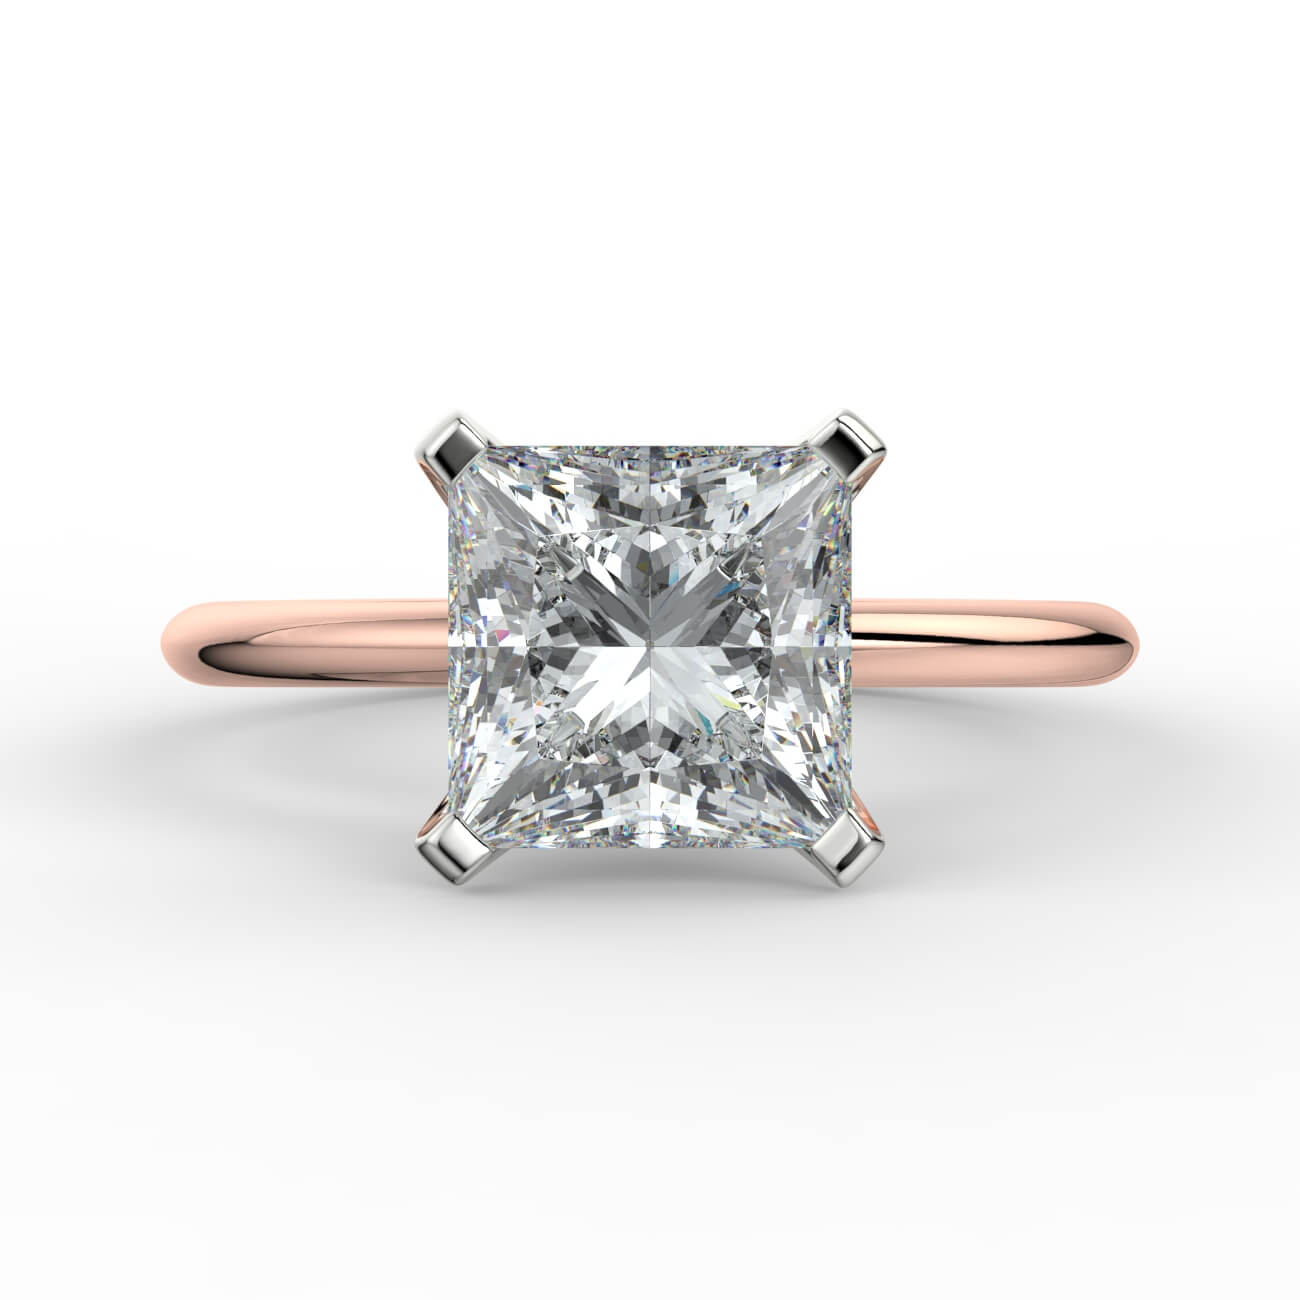 Knife-edge solitaire princess cut diamond engagement ring in white and rose gold – Australian Diamond Network